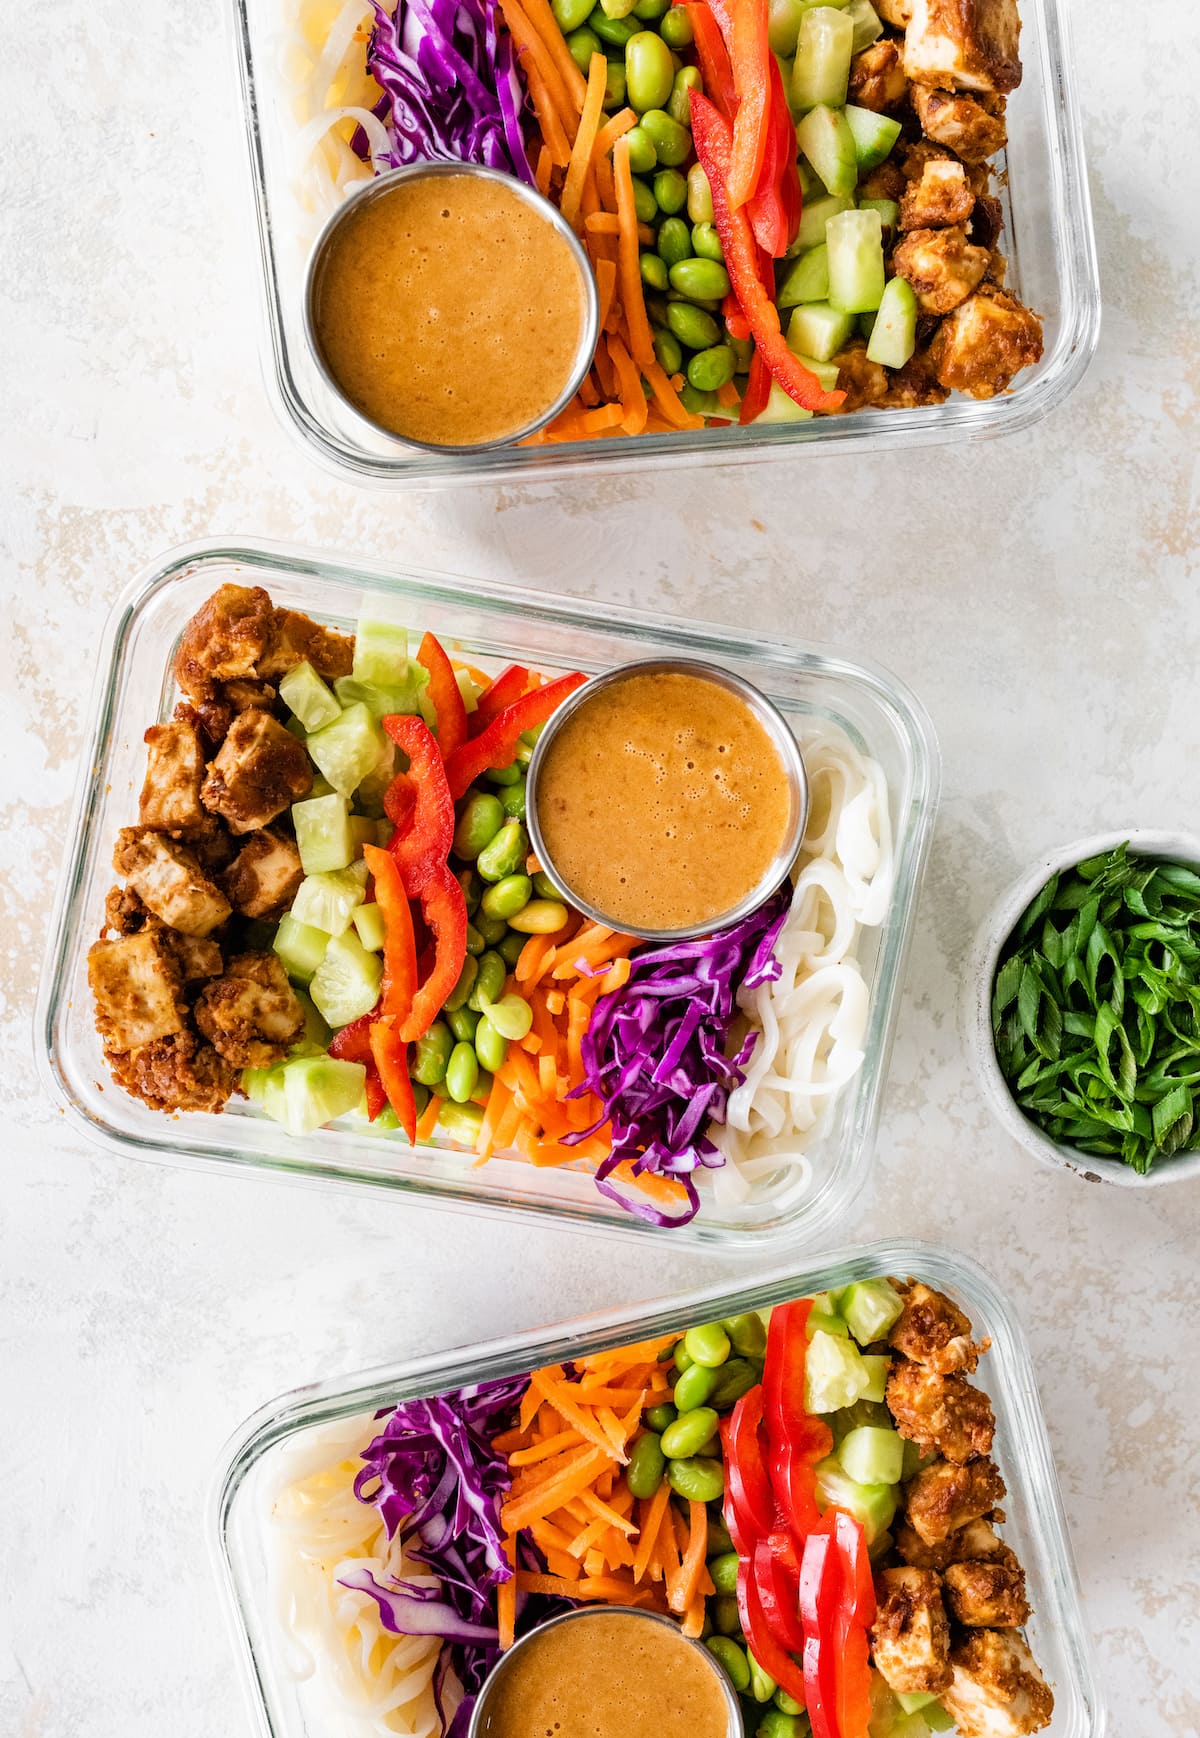 Three glass containers with the ingredients for the Asian noodle bowl including peanut baked tofu, red pepper, purple cabbage, edamame, rice noodles, celery, shredded carrots, and a sauce.